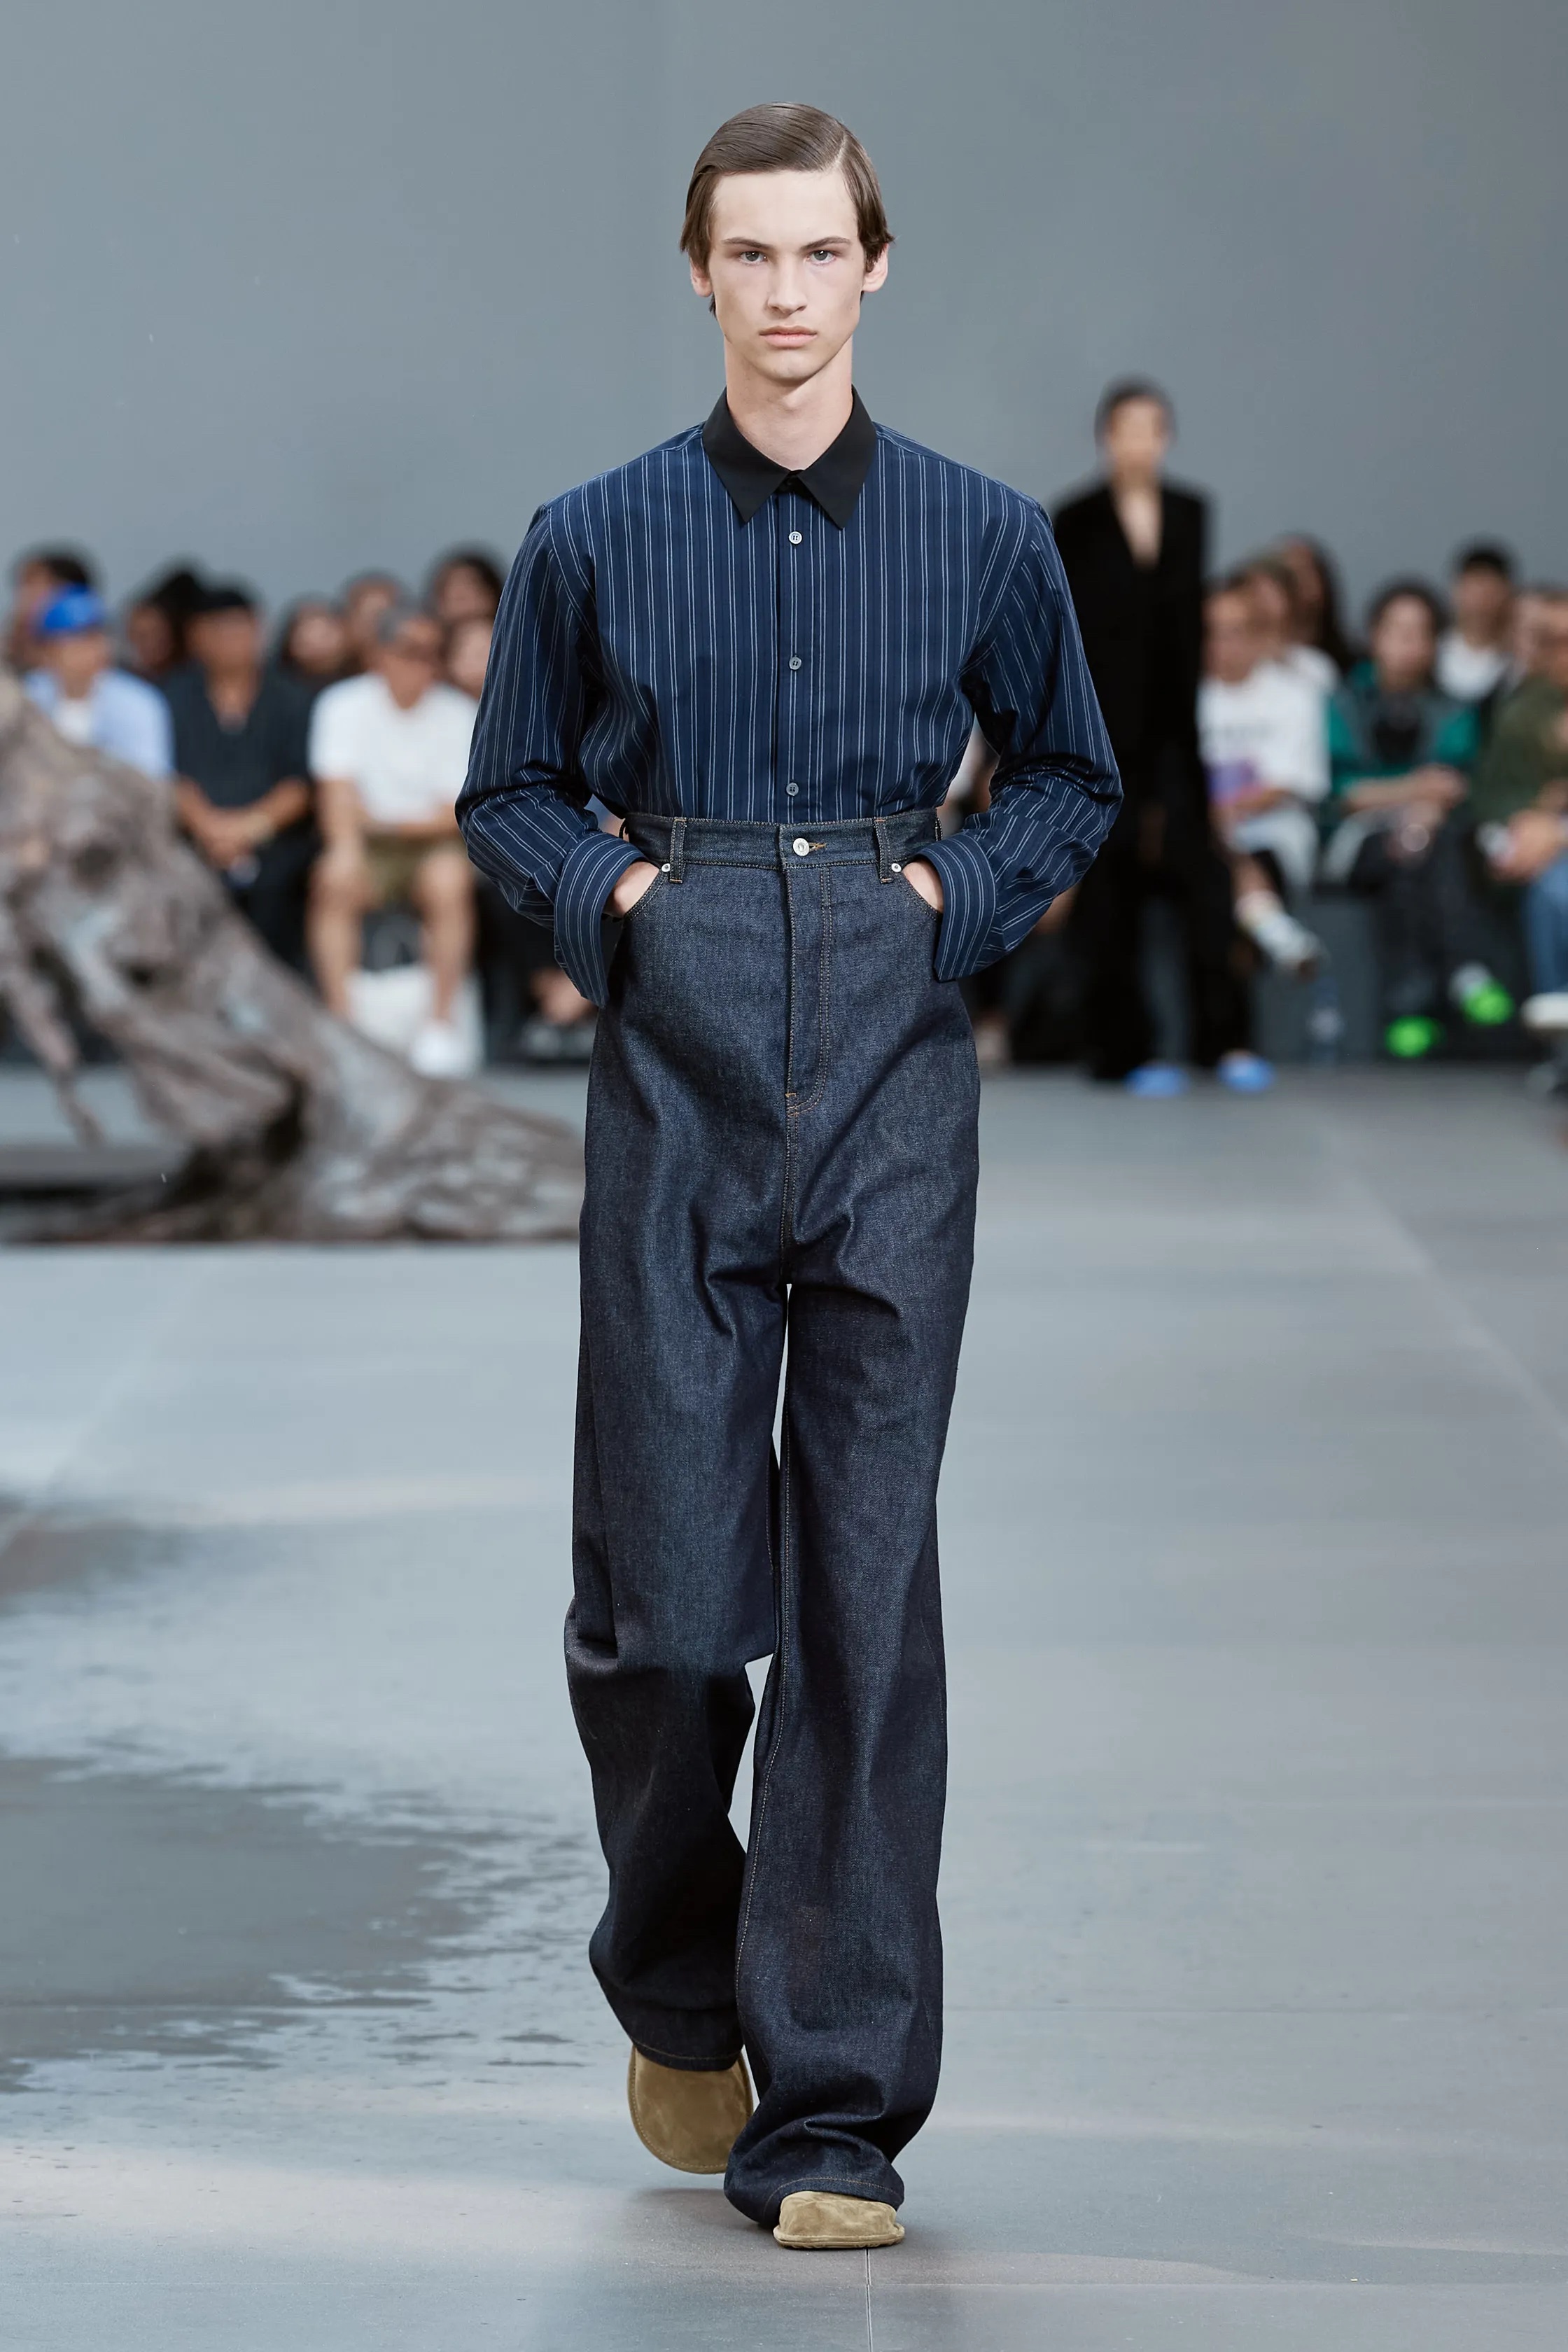 Loewe Brought Sparkles, High-Waisted Jeans And Leather Full Body Outfits to  Paris Men's Fashion Week - A&E Magazine